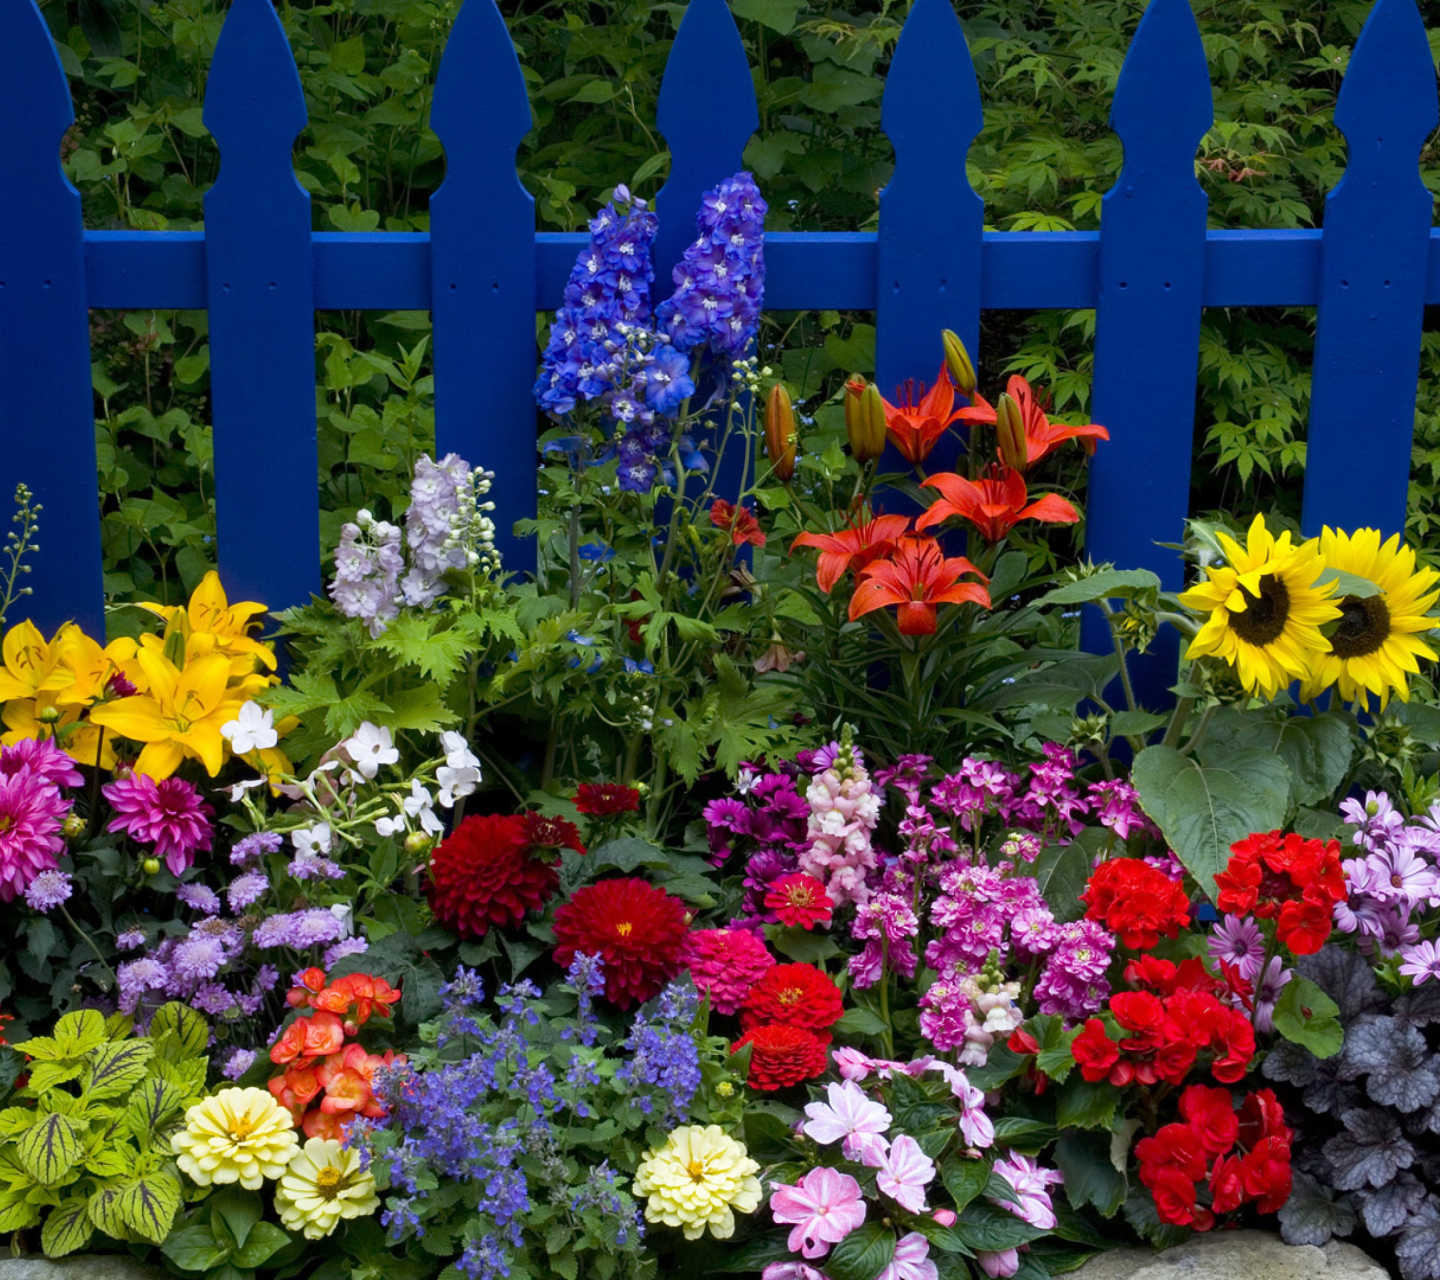 Garden Flowers In Front Of Bright Blue Fence wallpaper 1440x1280